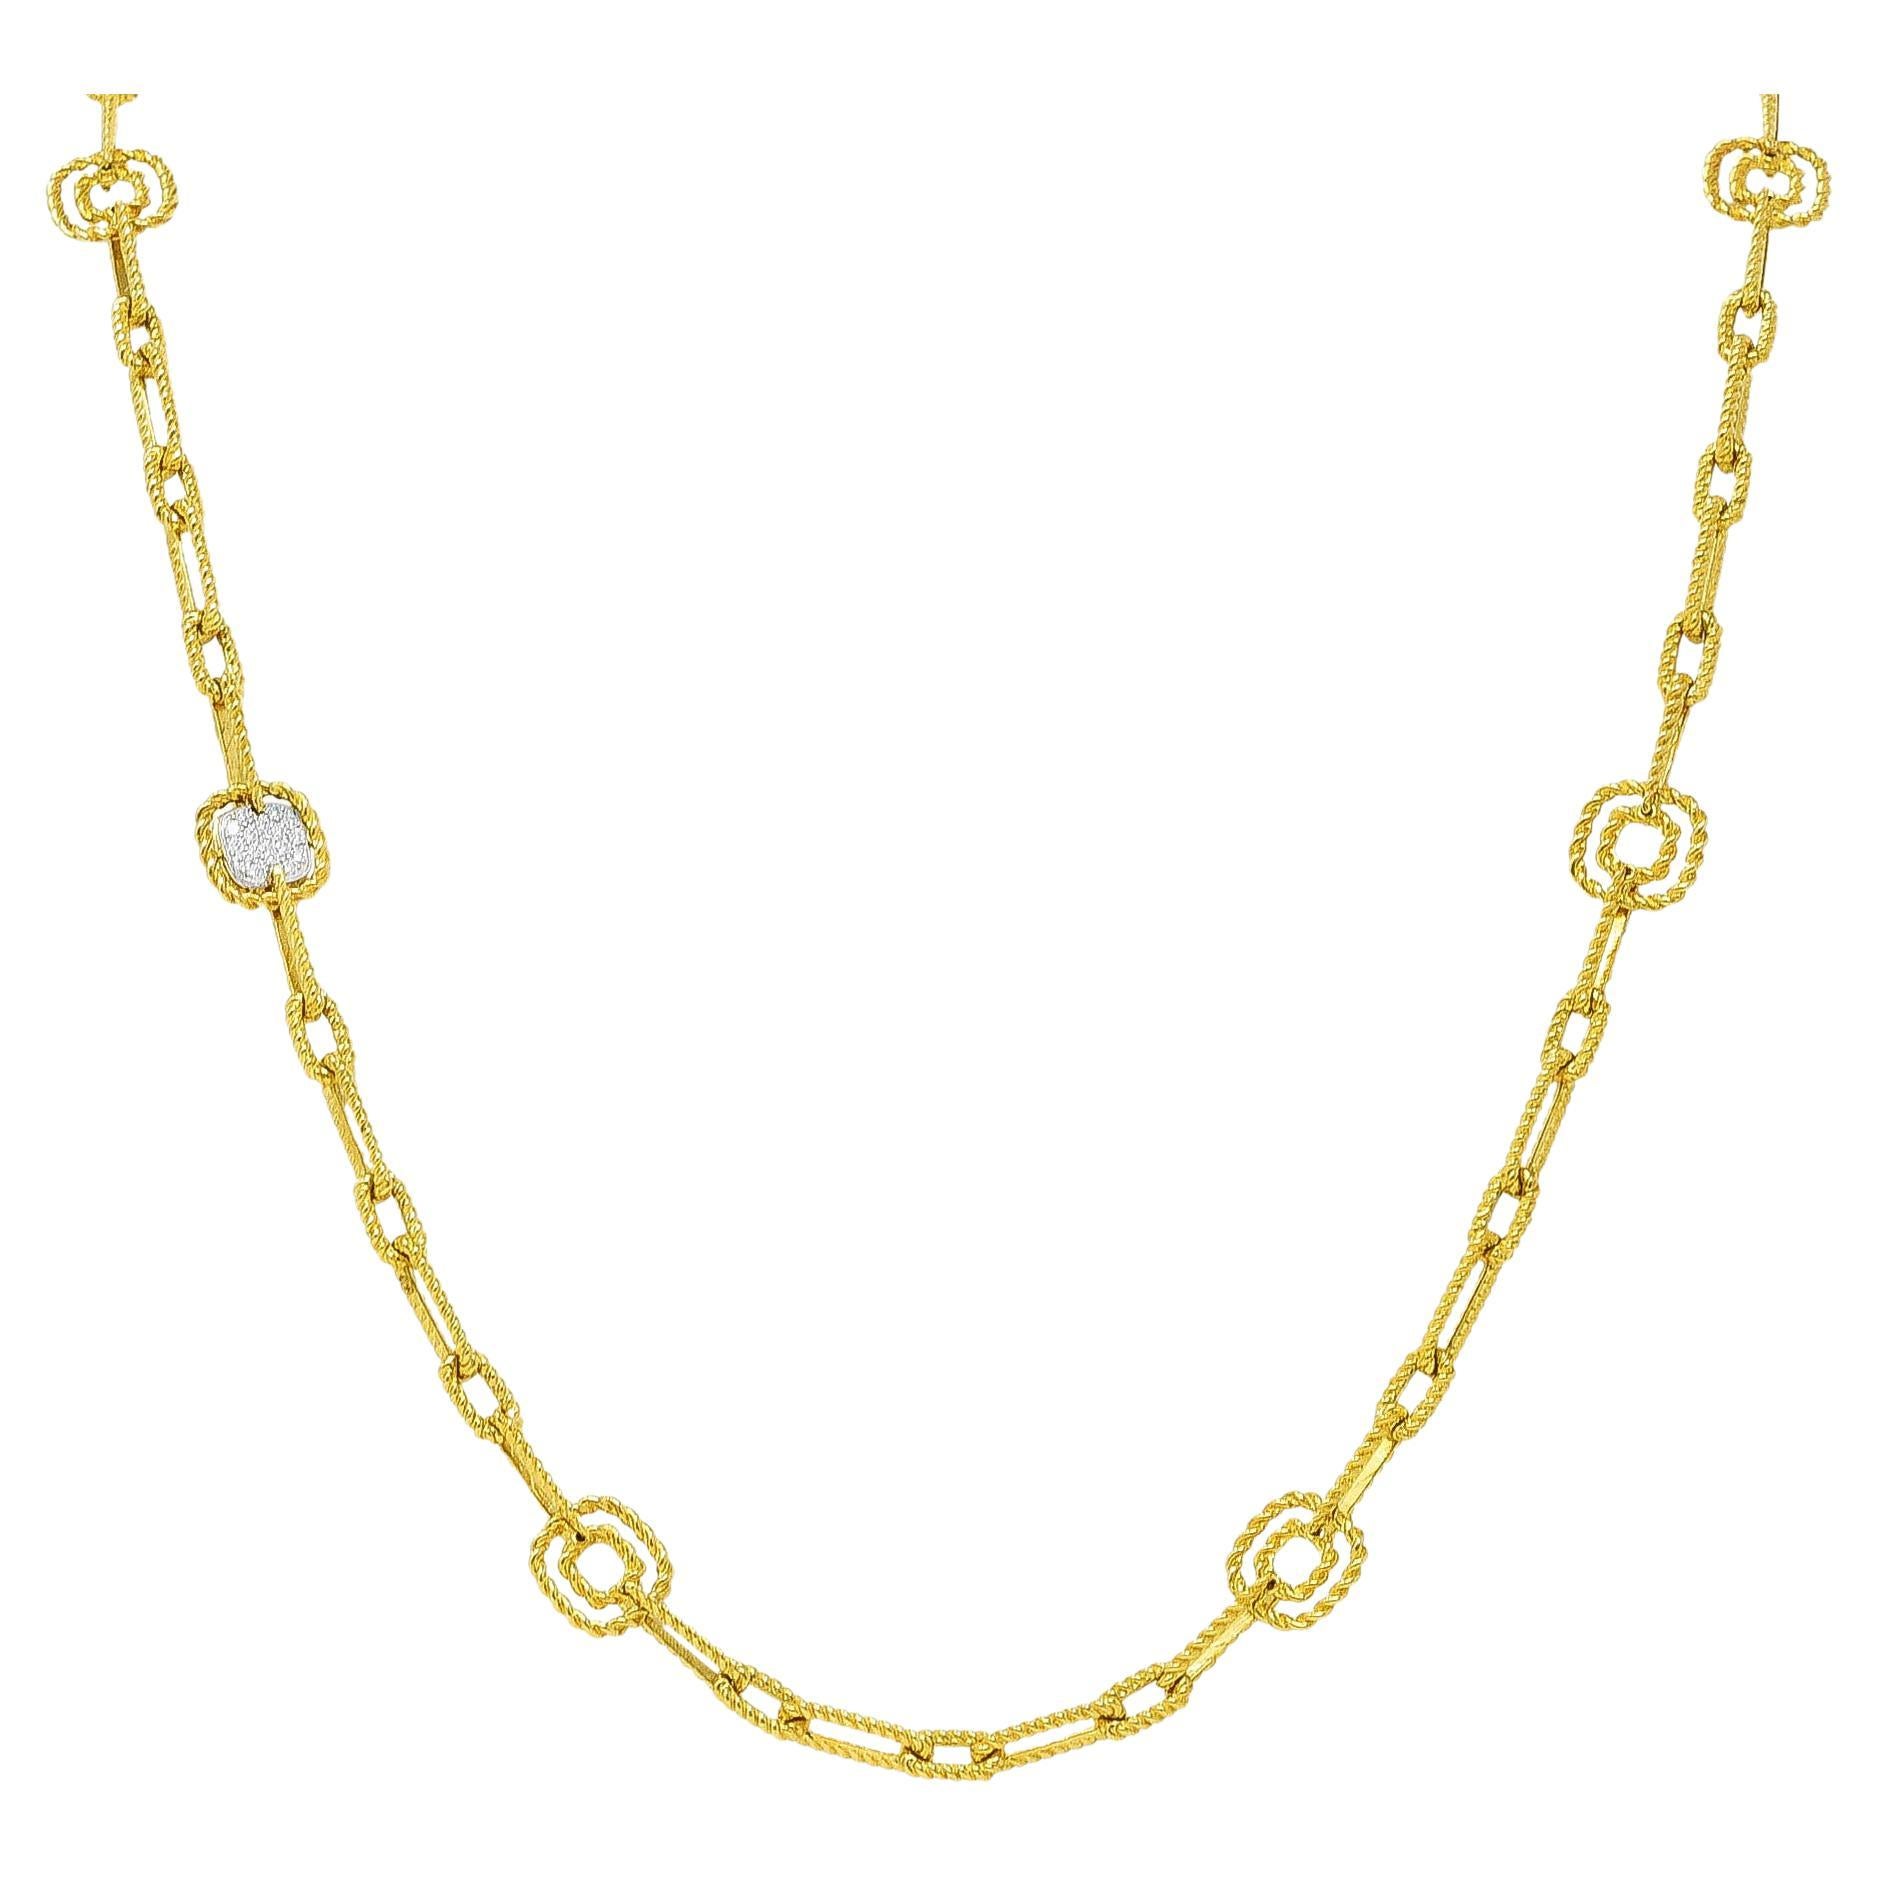 Roberto Coin Vintage Diamond Two-Tone 18 Karat Gold Twisted Rope Chain Necklace